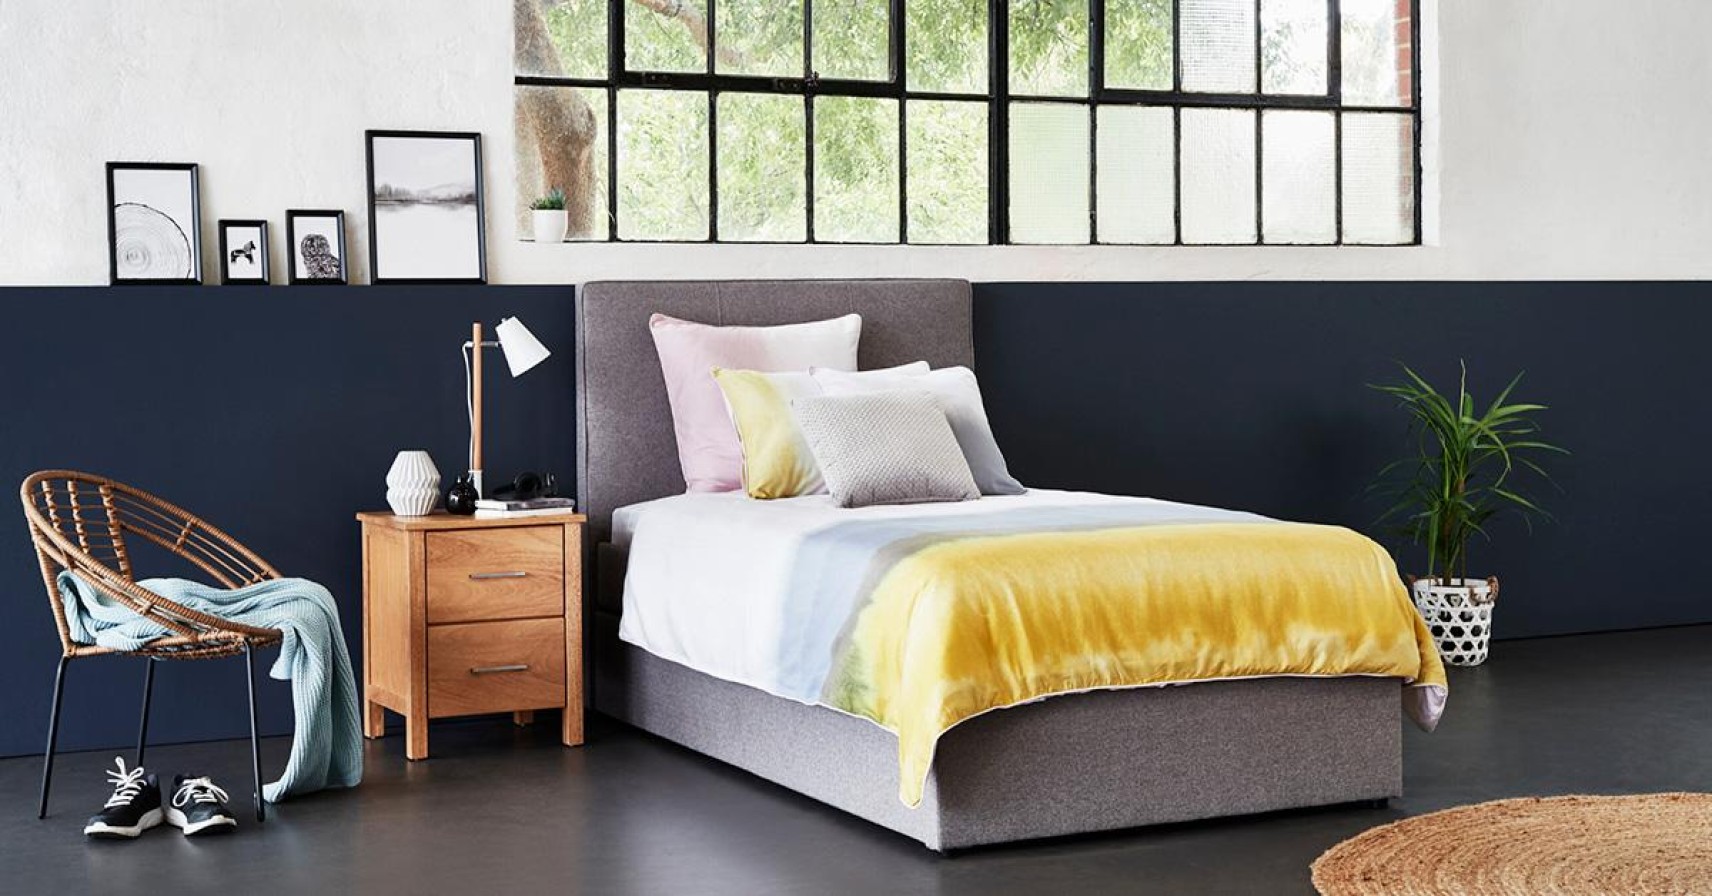 A stylish teenage bed in a bedroom setting